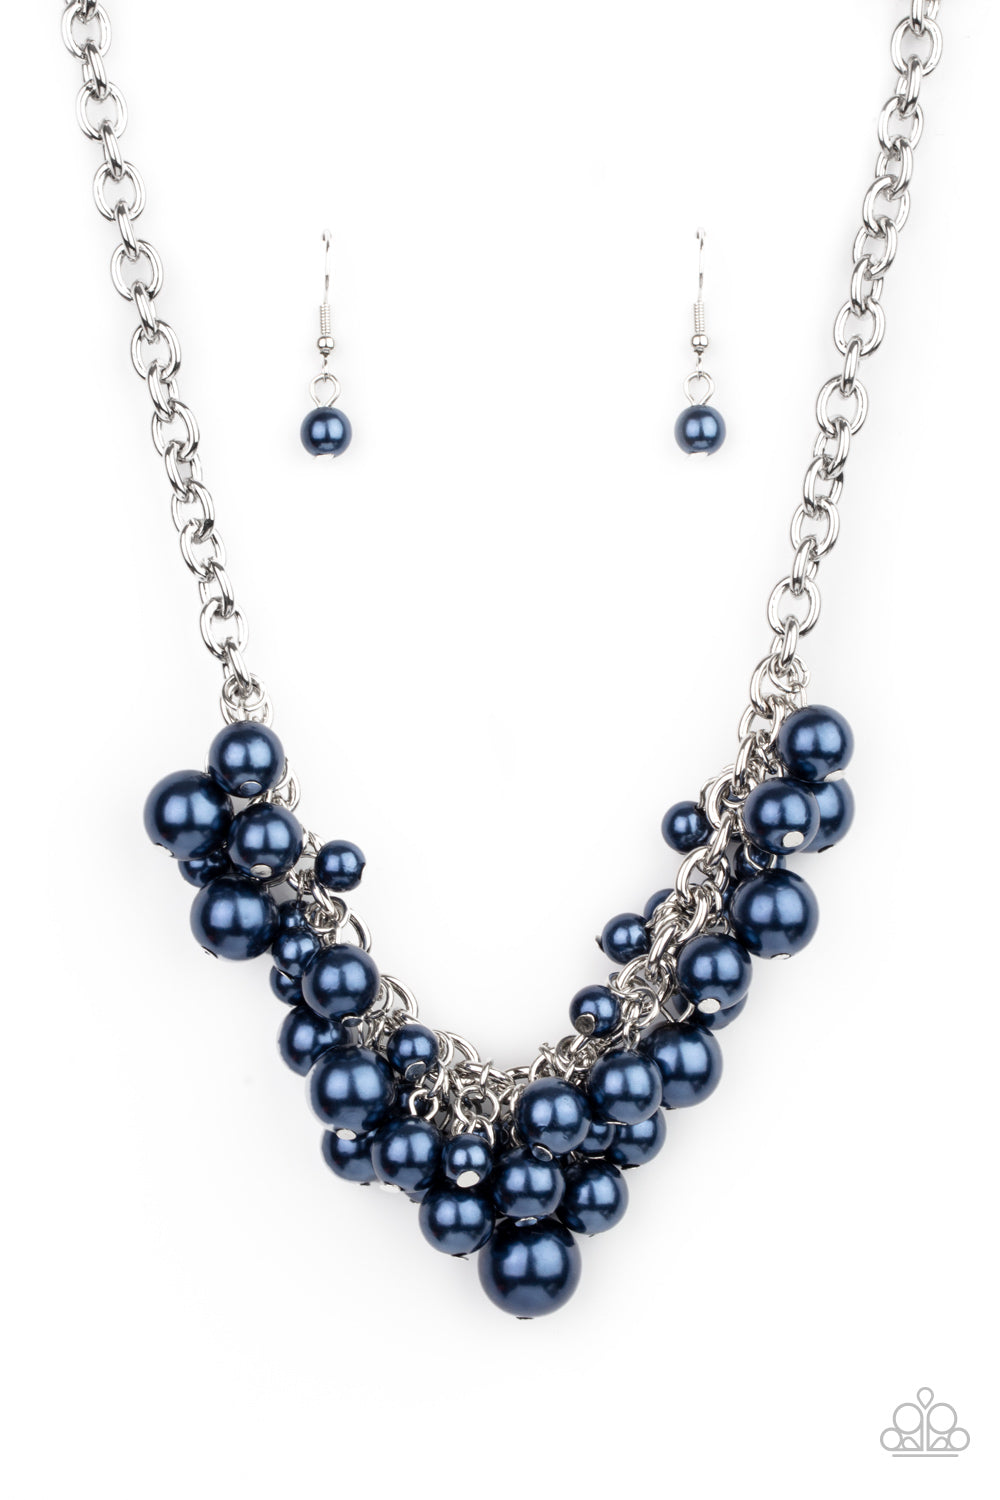 A bubbly collection of classic and oversized blue pearls swing from the bottom of a bold silver chain, creating a dramatic fringe below the collar. Features an adjustable clasp closure.